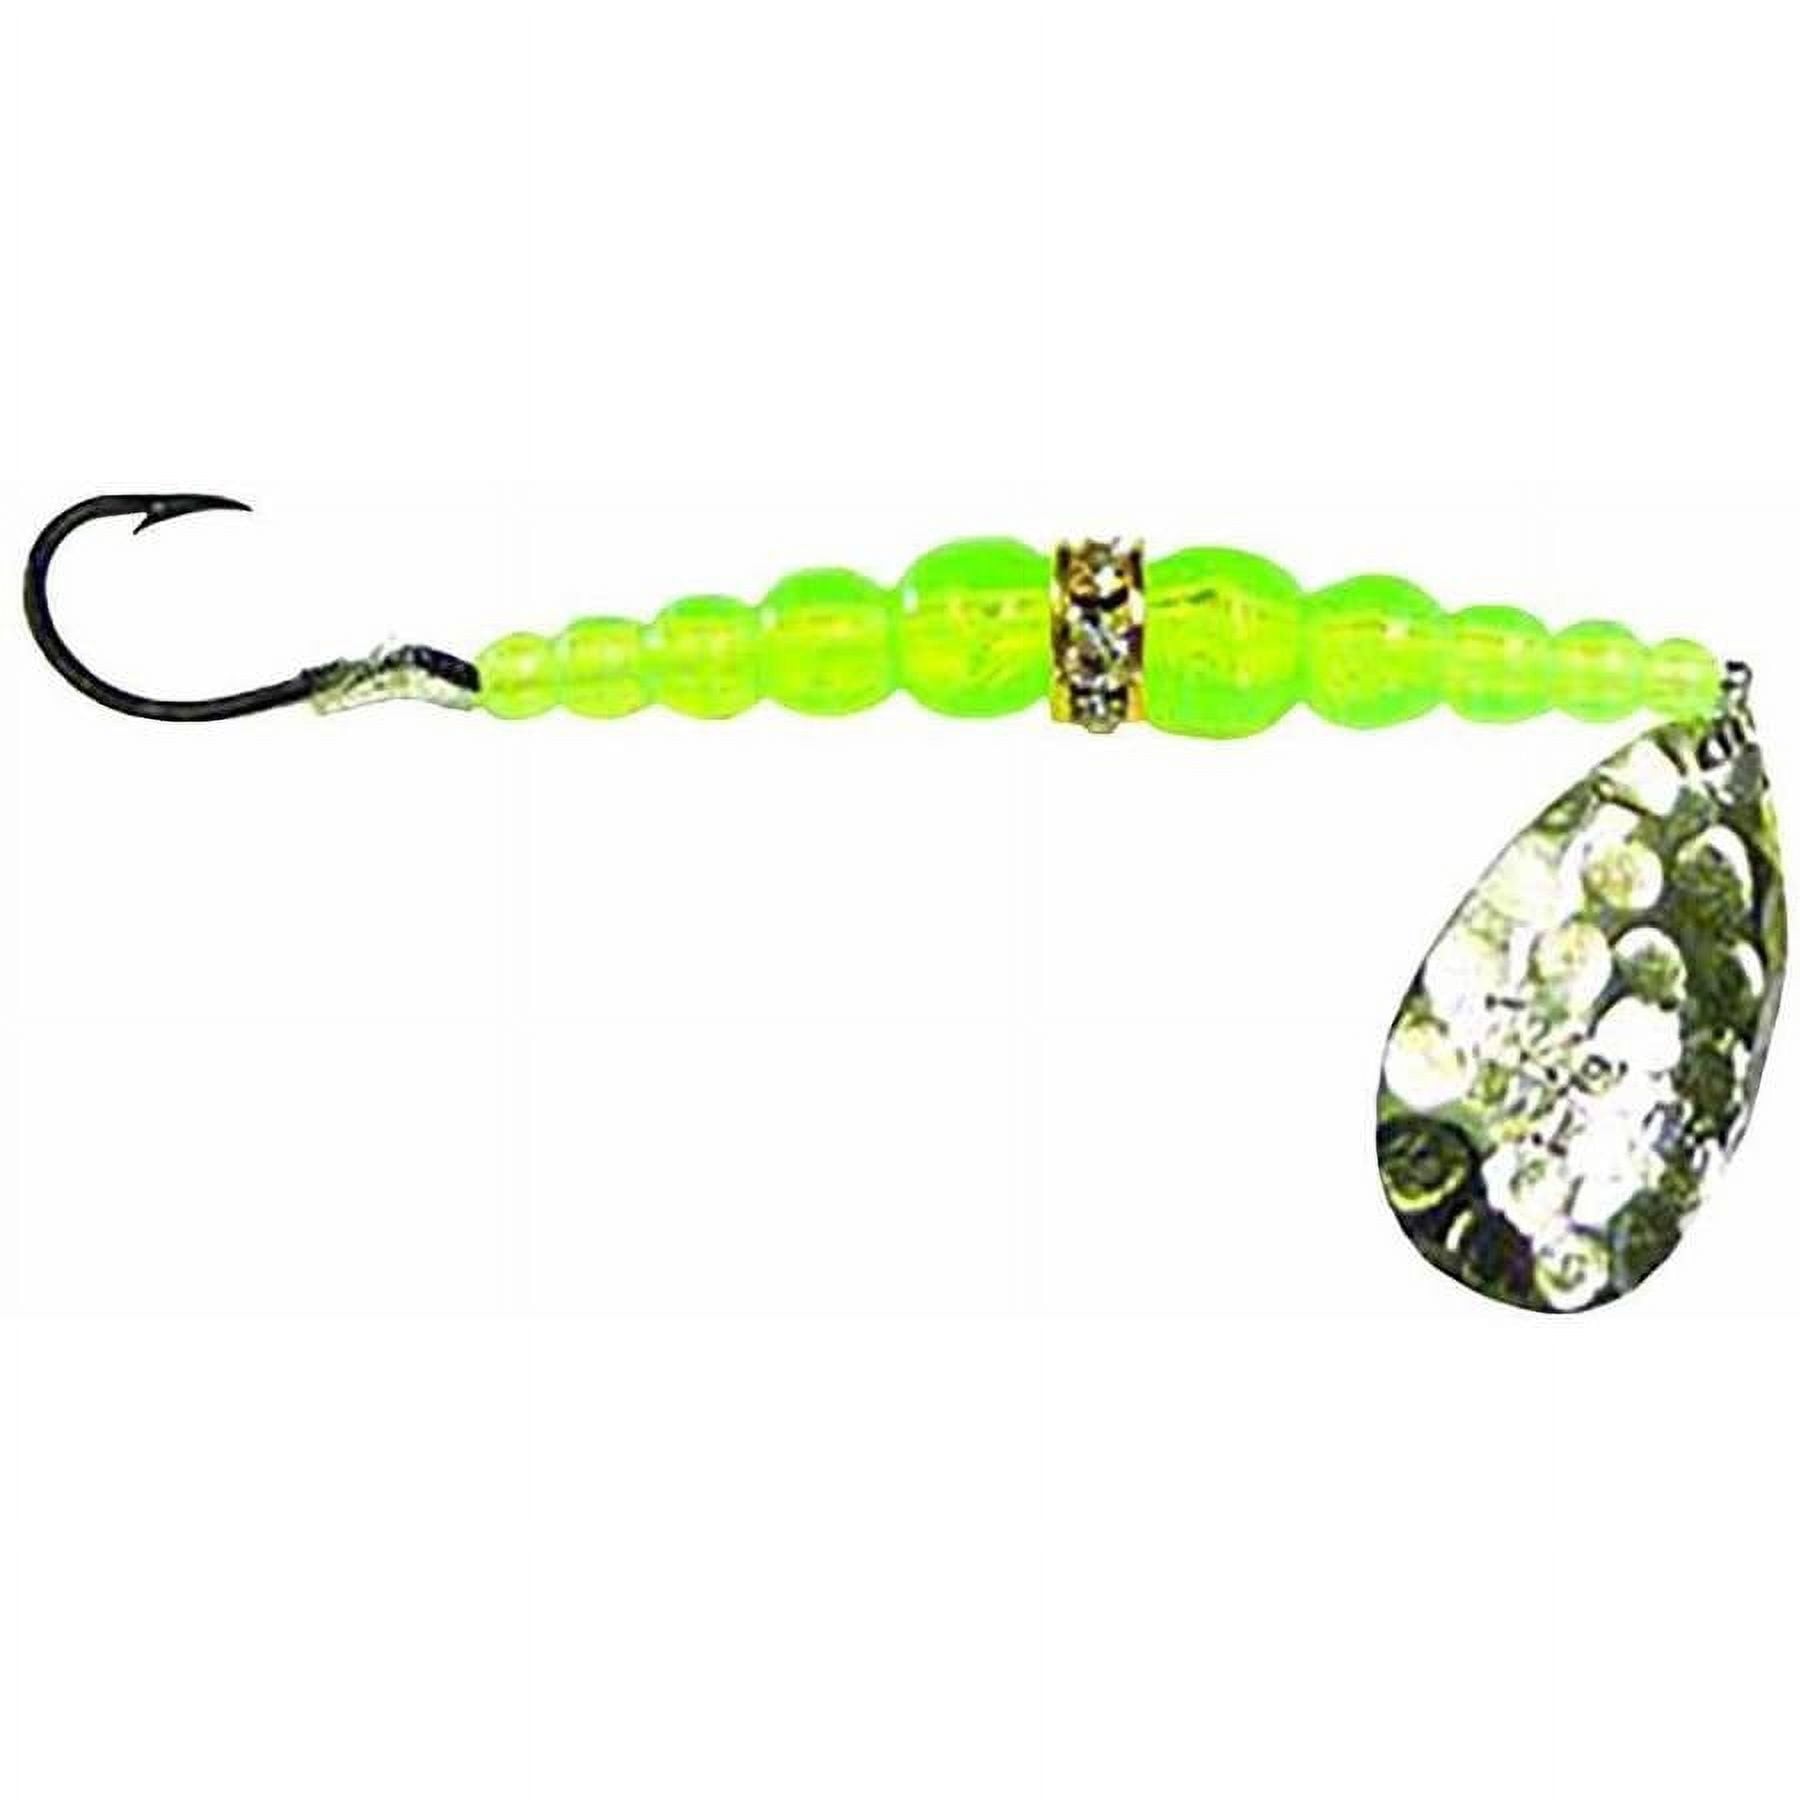 Dick's Sporting Goods Mack's Lure Wedding Ring Classic Spinner Lures